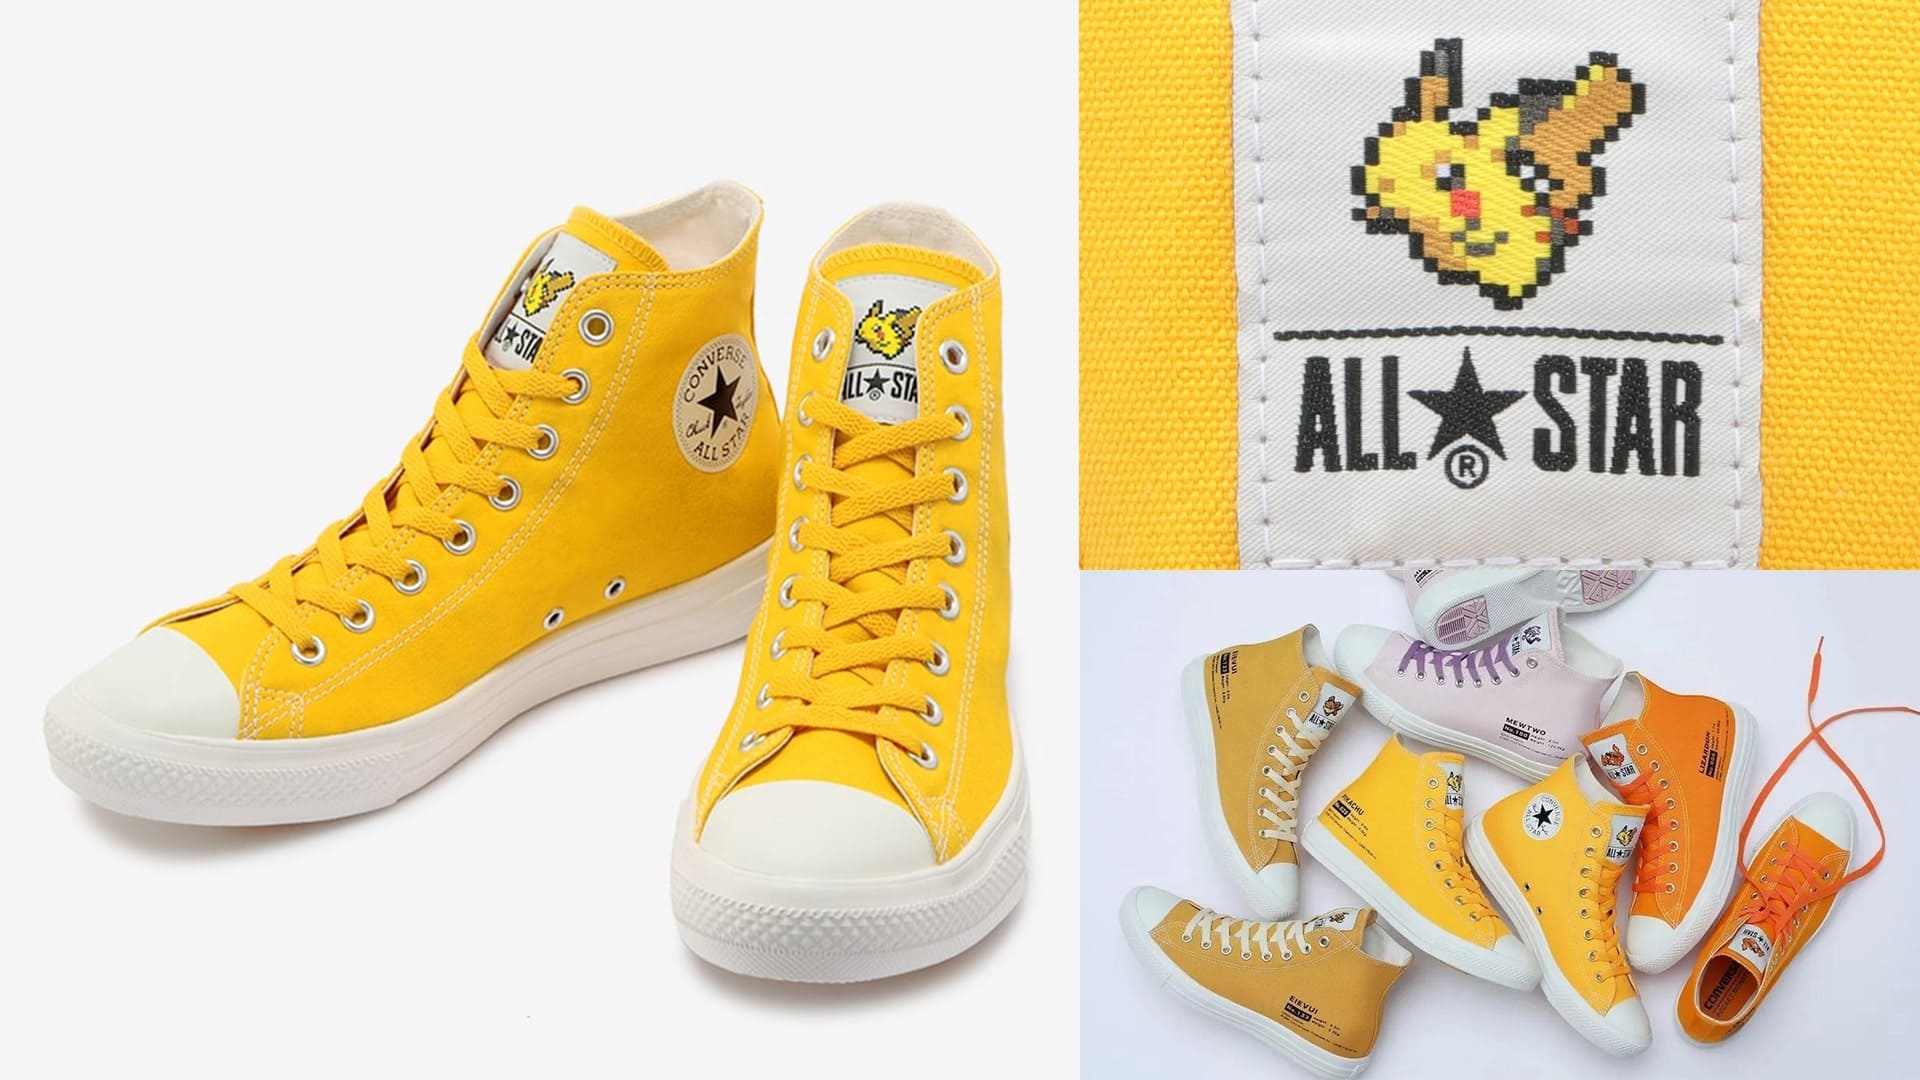 Pokémon And Converse Collaborate Again For New Sneaker Collection